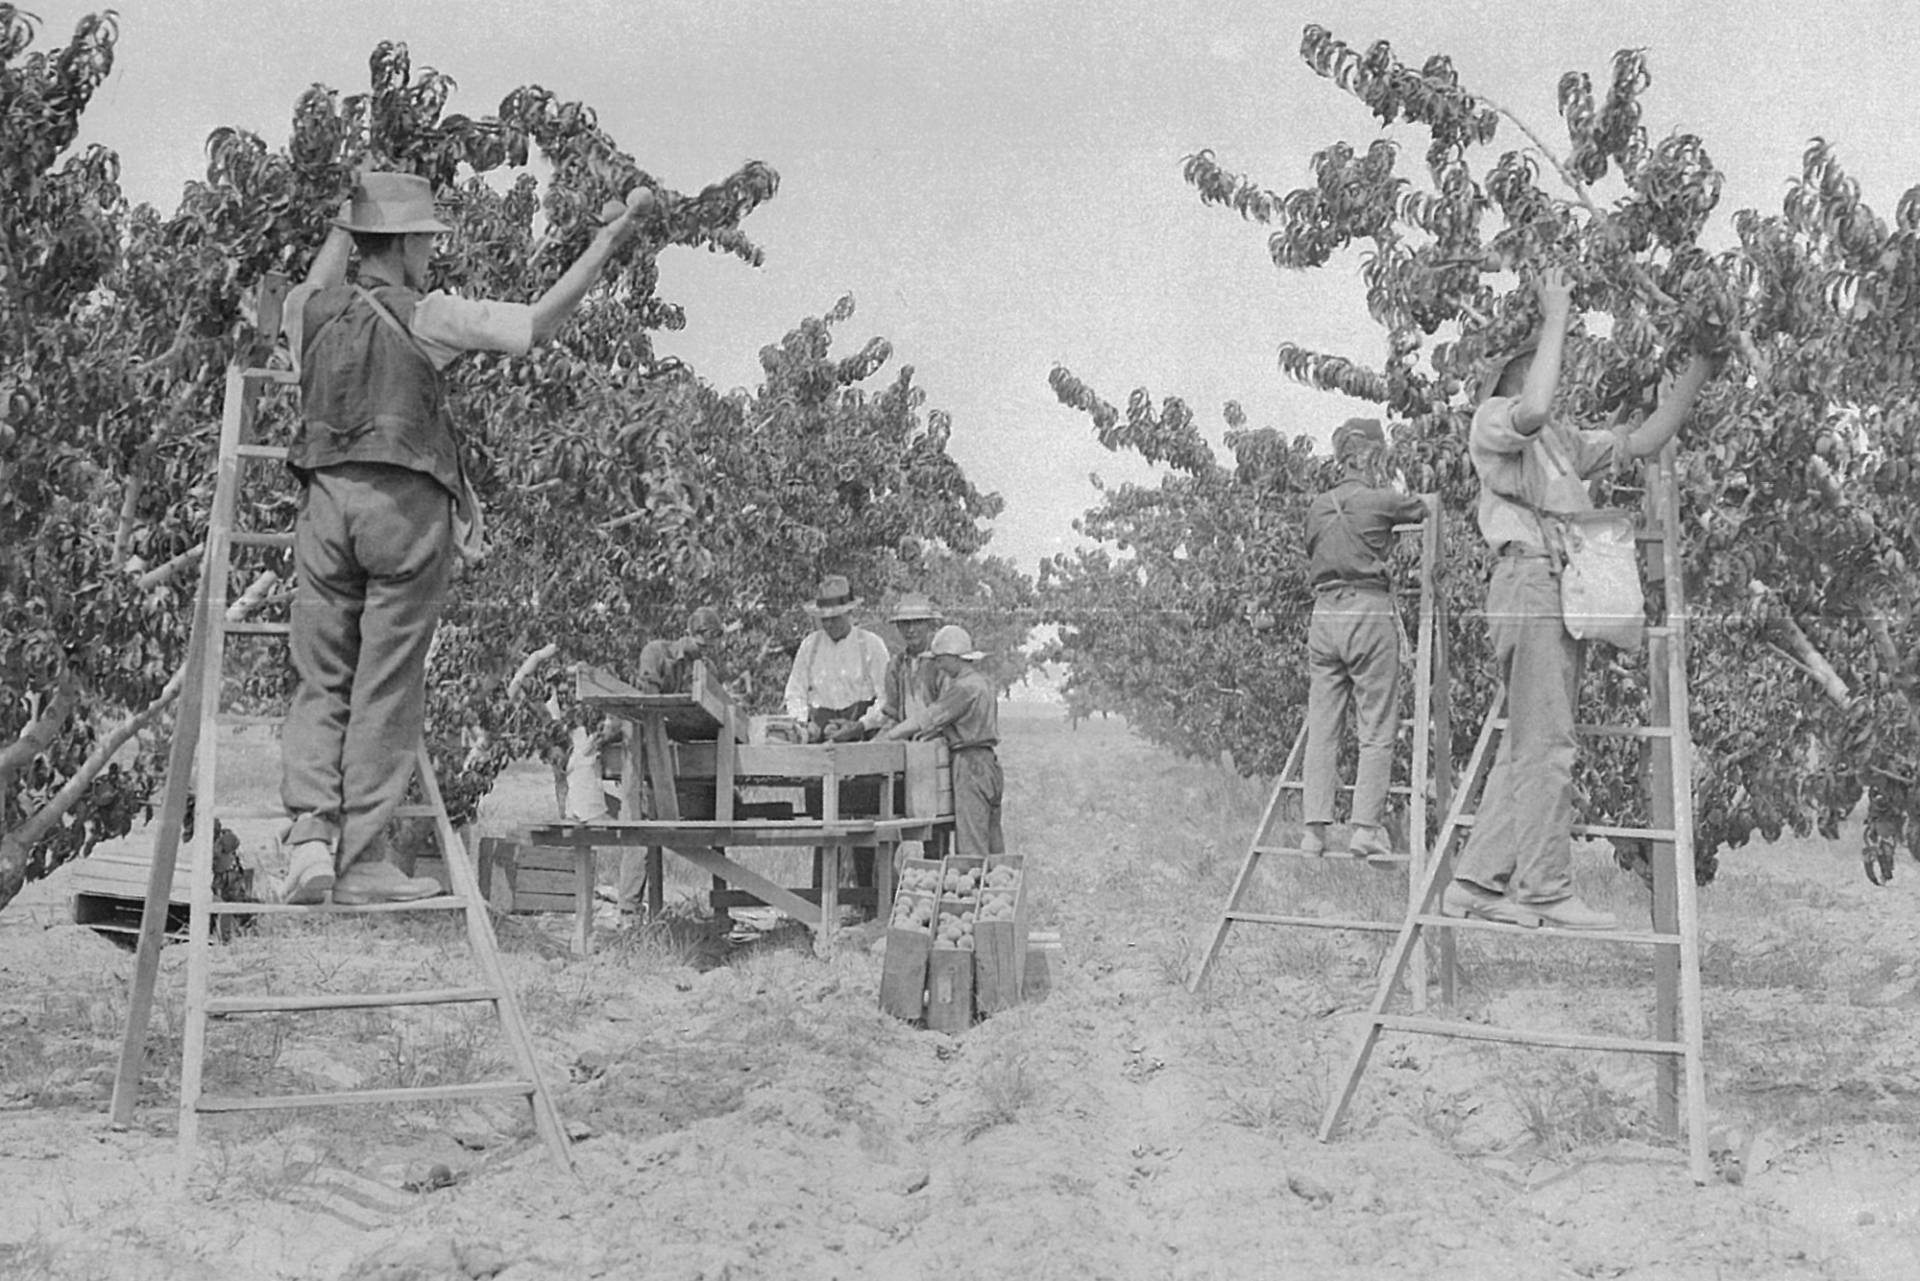 Historical monochromatic grainy photograph of workers on wooden ladders harvesting fruit in the Goulburn Valley